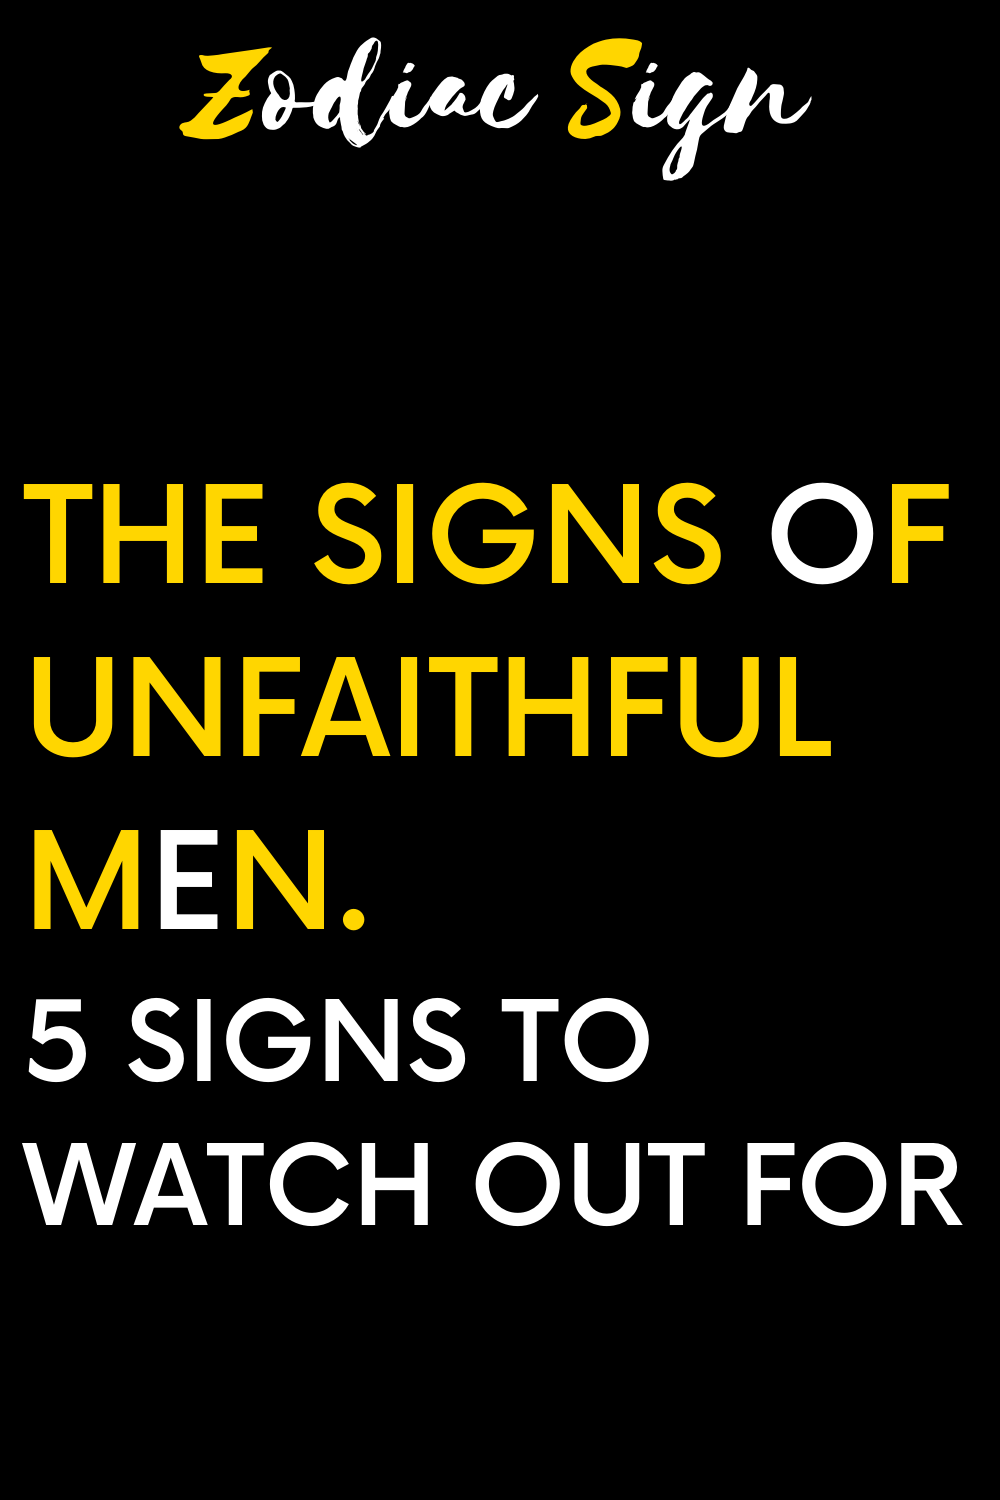 The signs of unfaithful men. 5 signs to watch out for